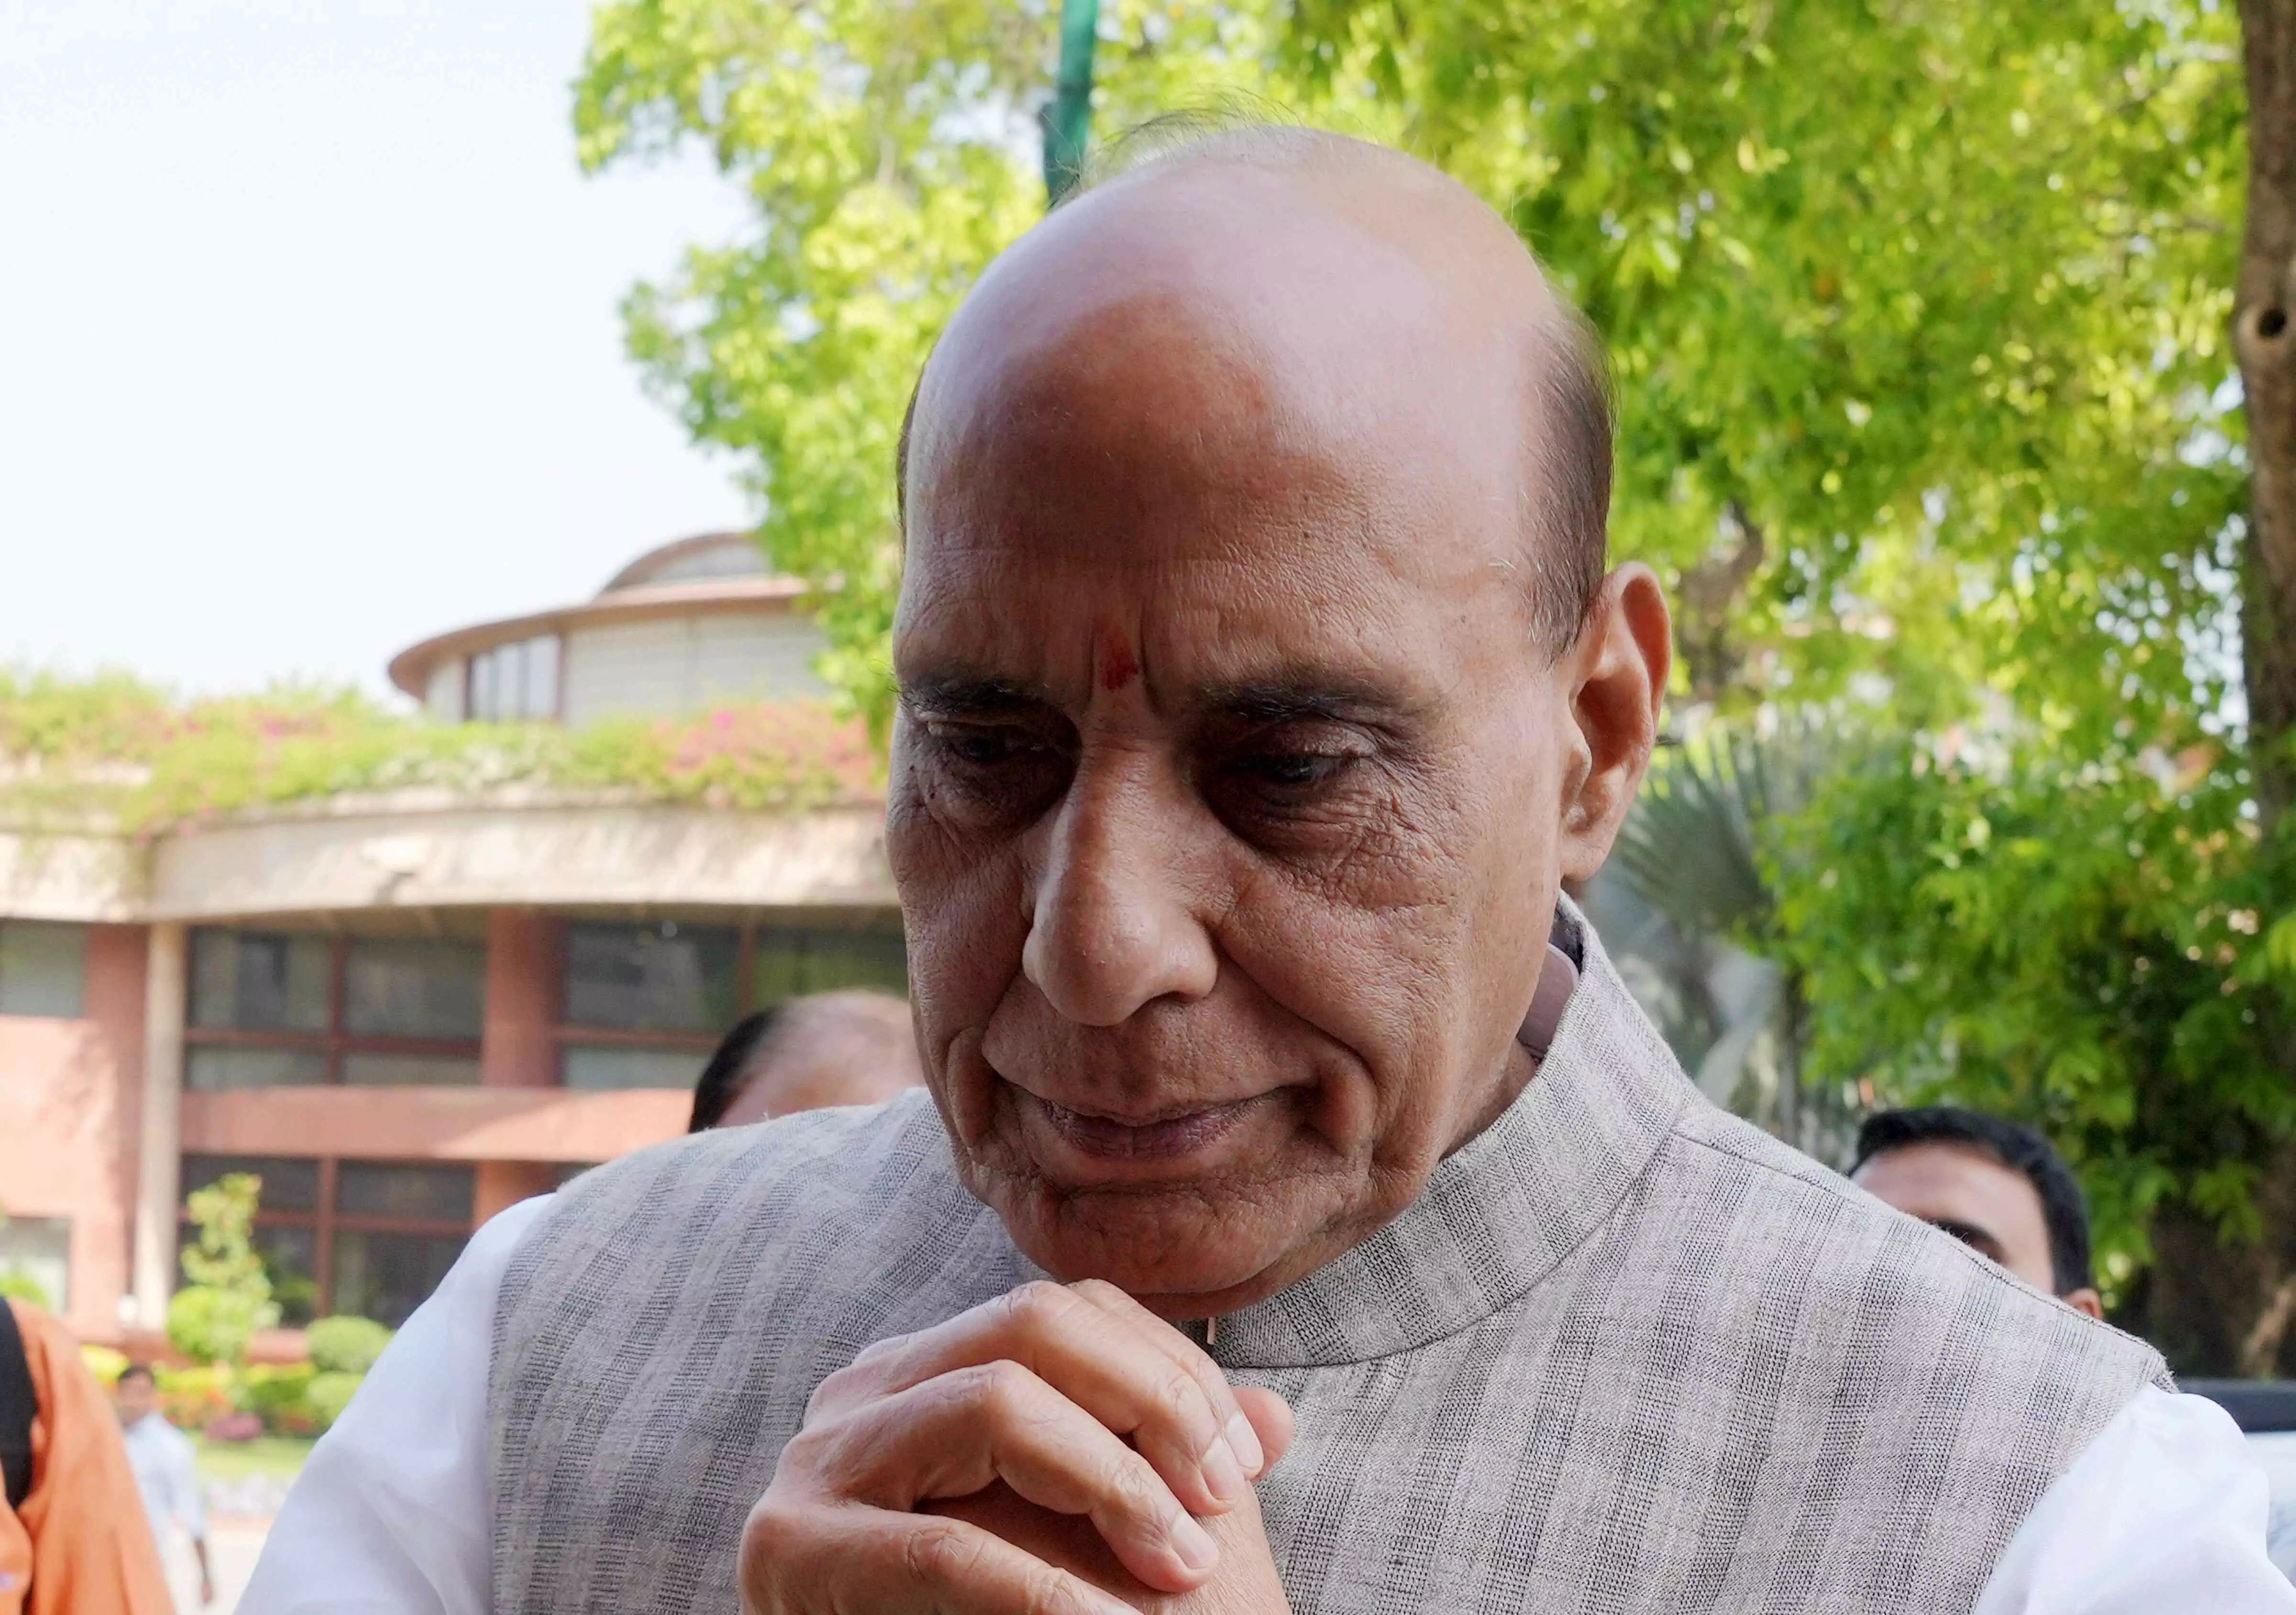 Defence Minister Rajnath Singh to hand over patrol vessel, landing craft to Maldives